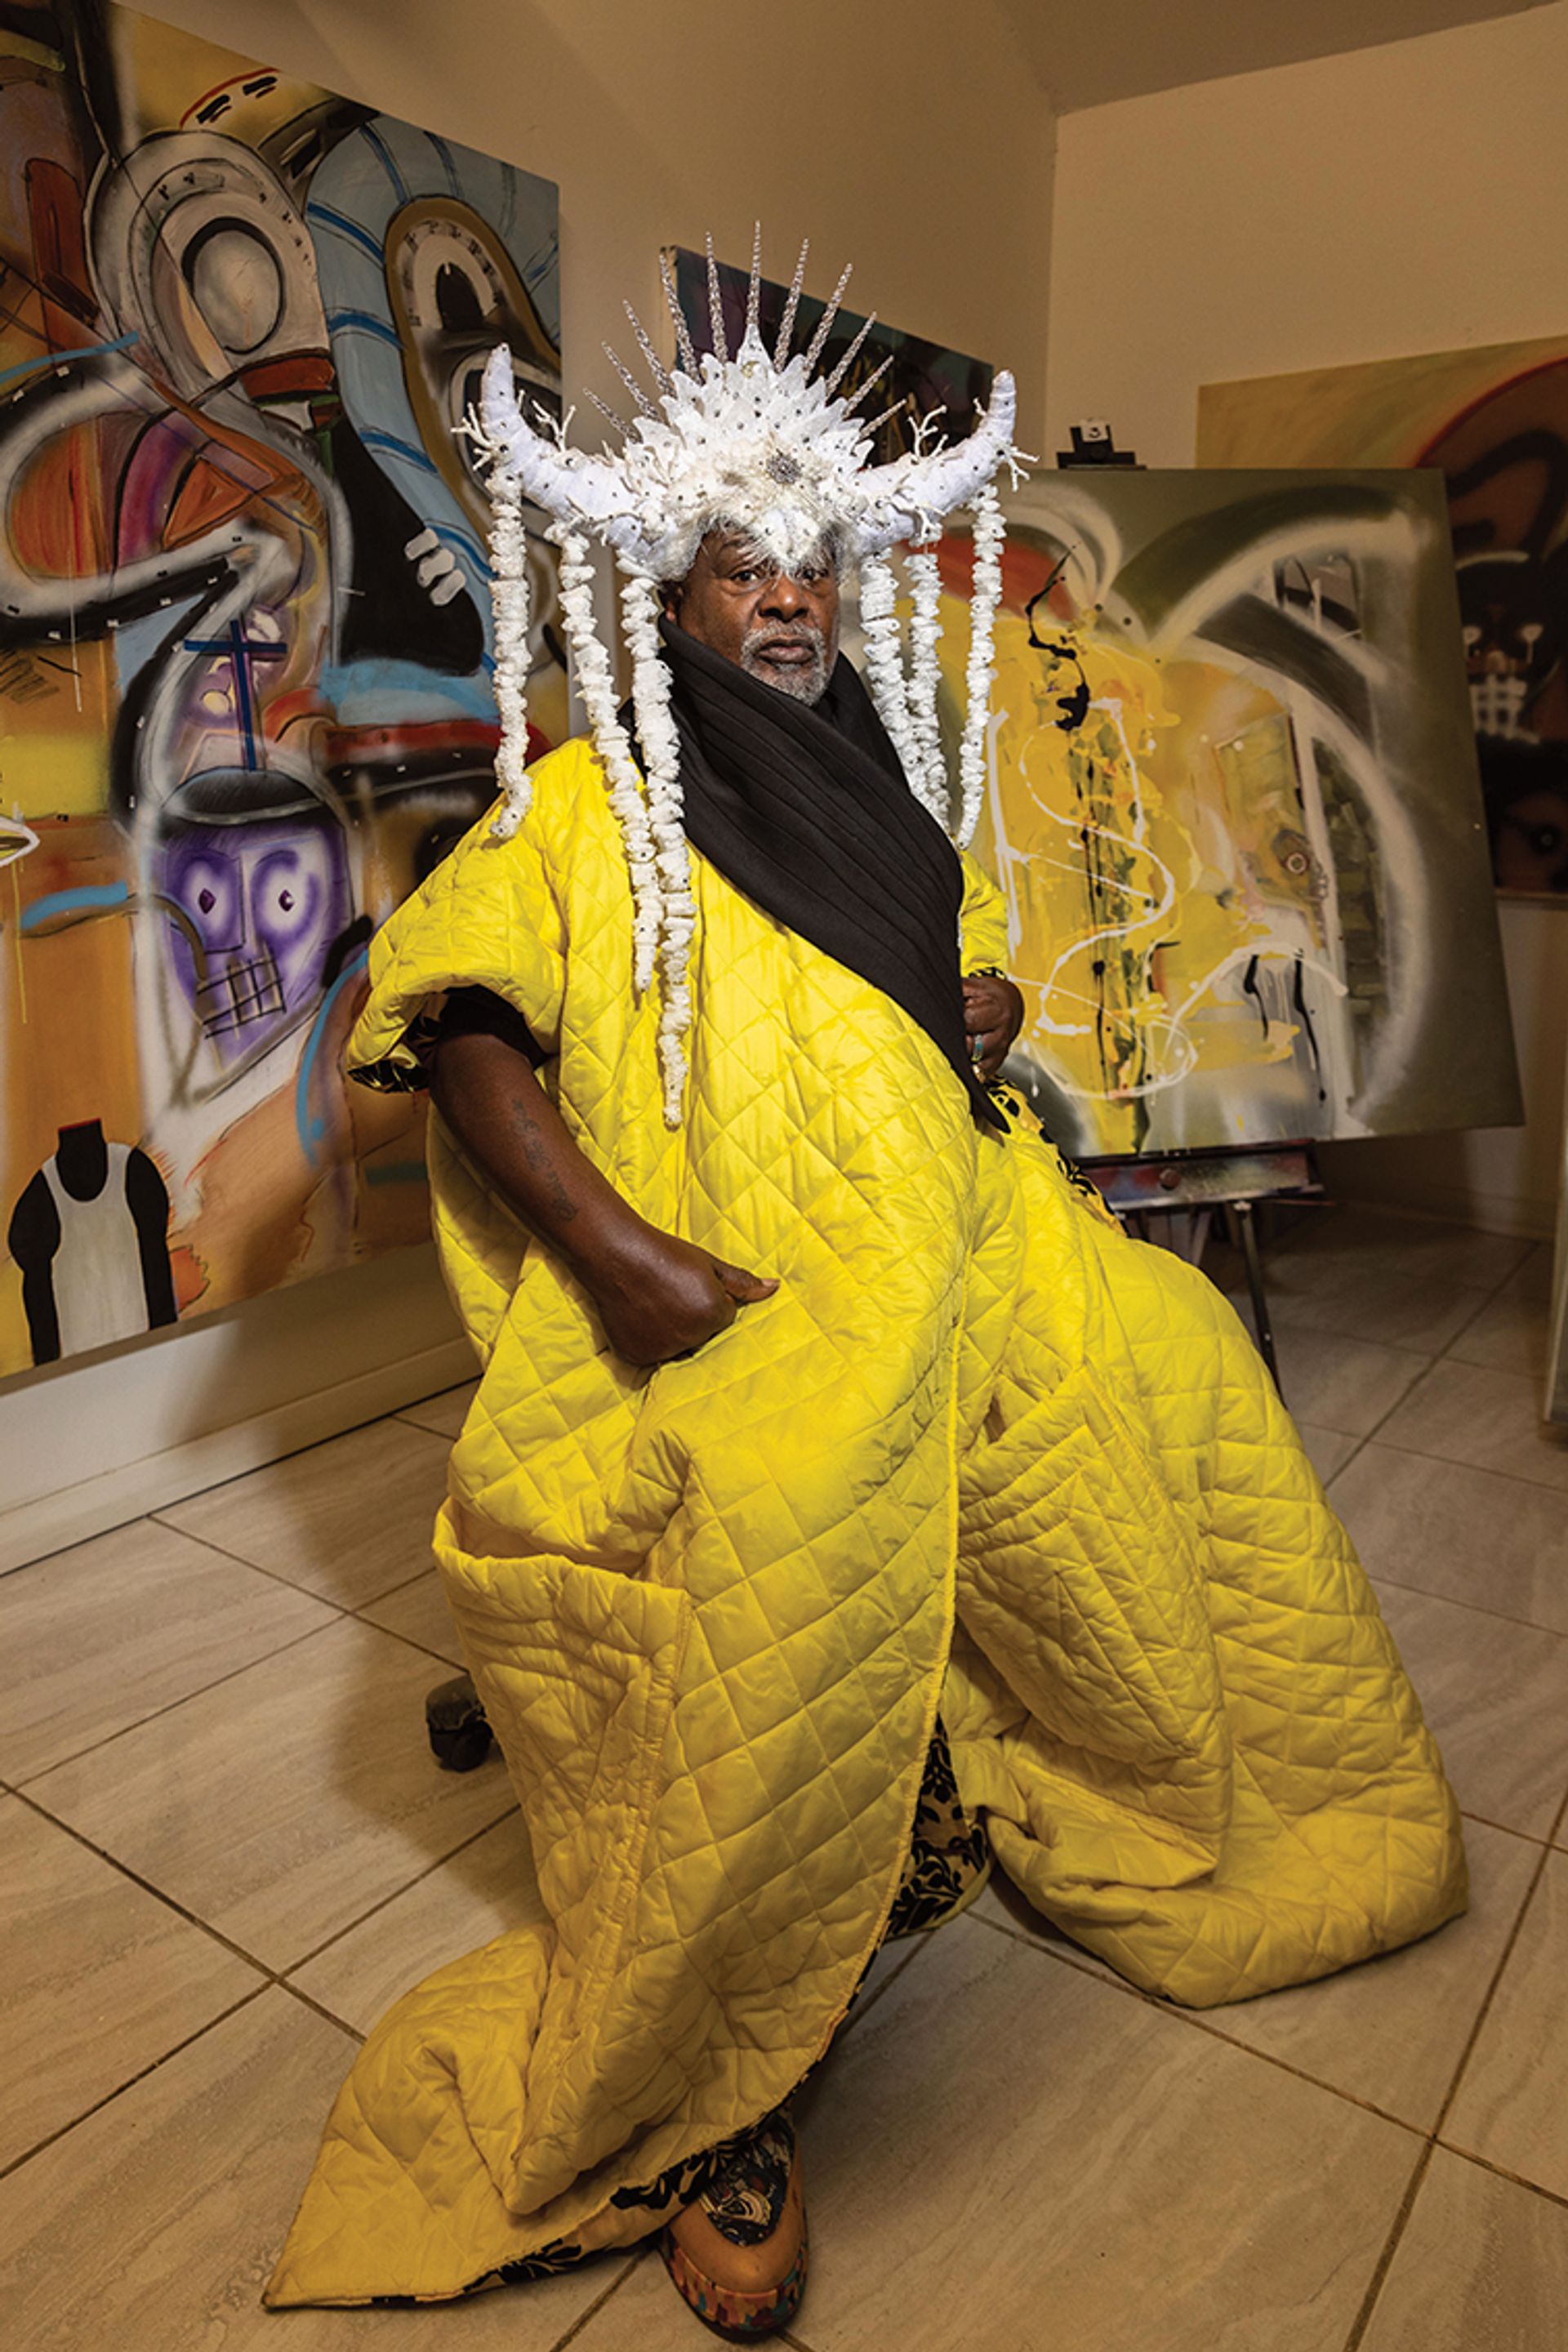 Artist and musician George Clinton in his studio in Tallahassee, Florida © Lynsey Weatherspoon 2021